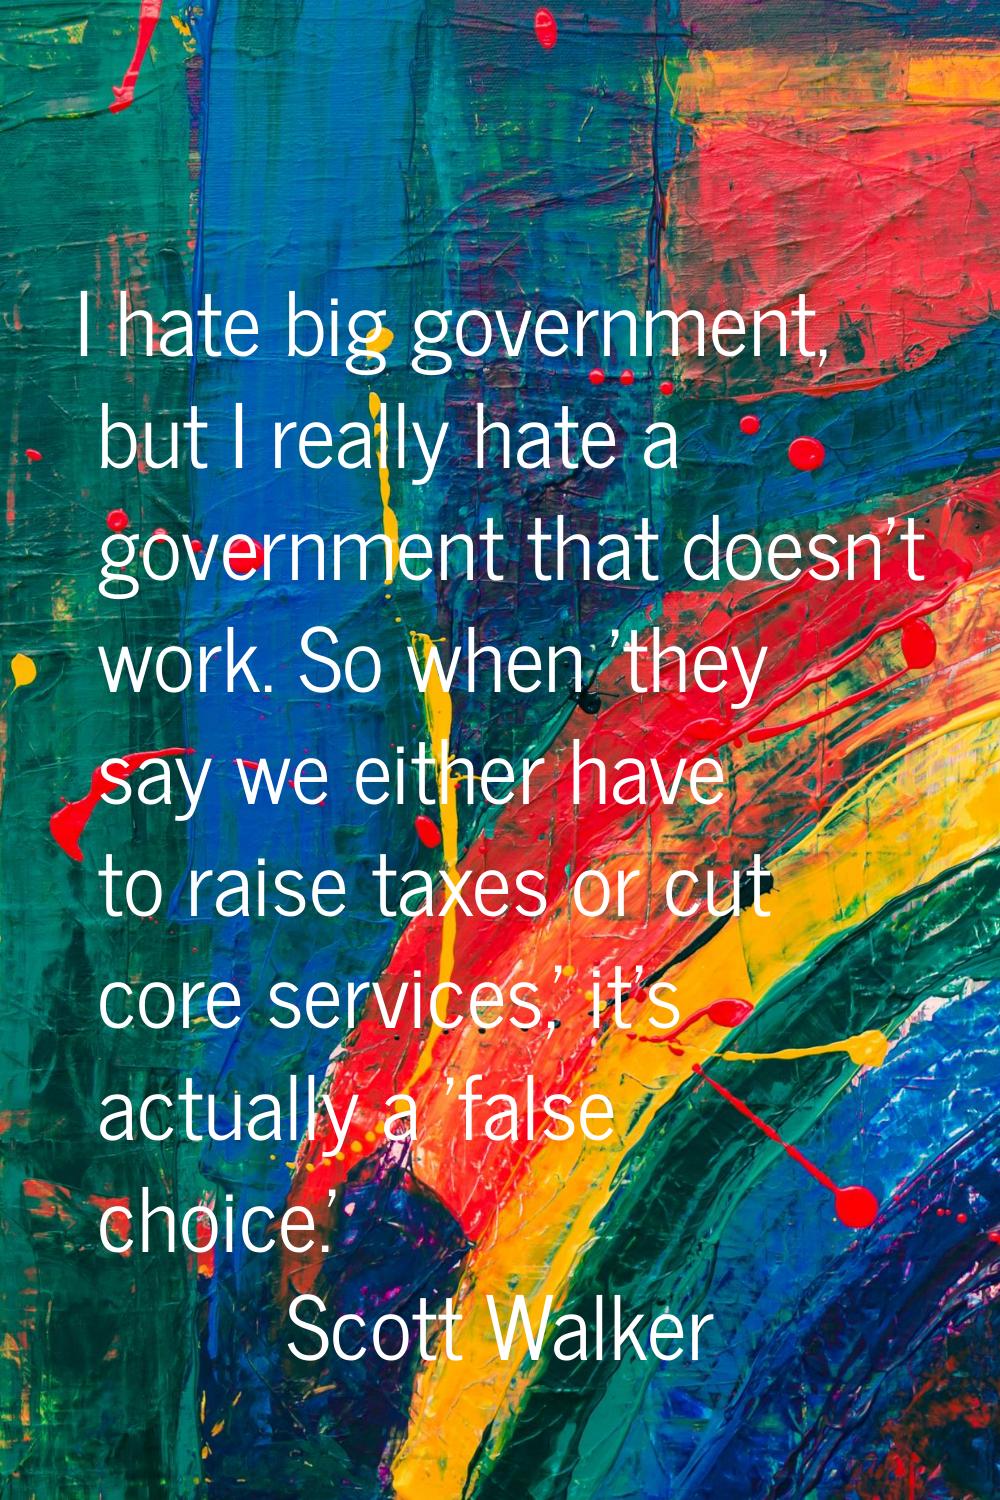 I hate big government, but I really hate a government that doesn't work. So when 'they say we eithe